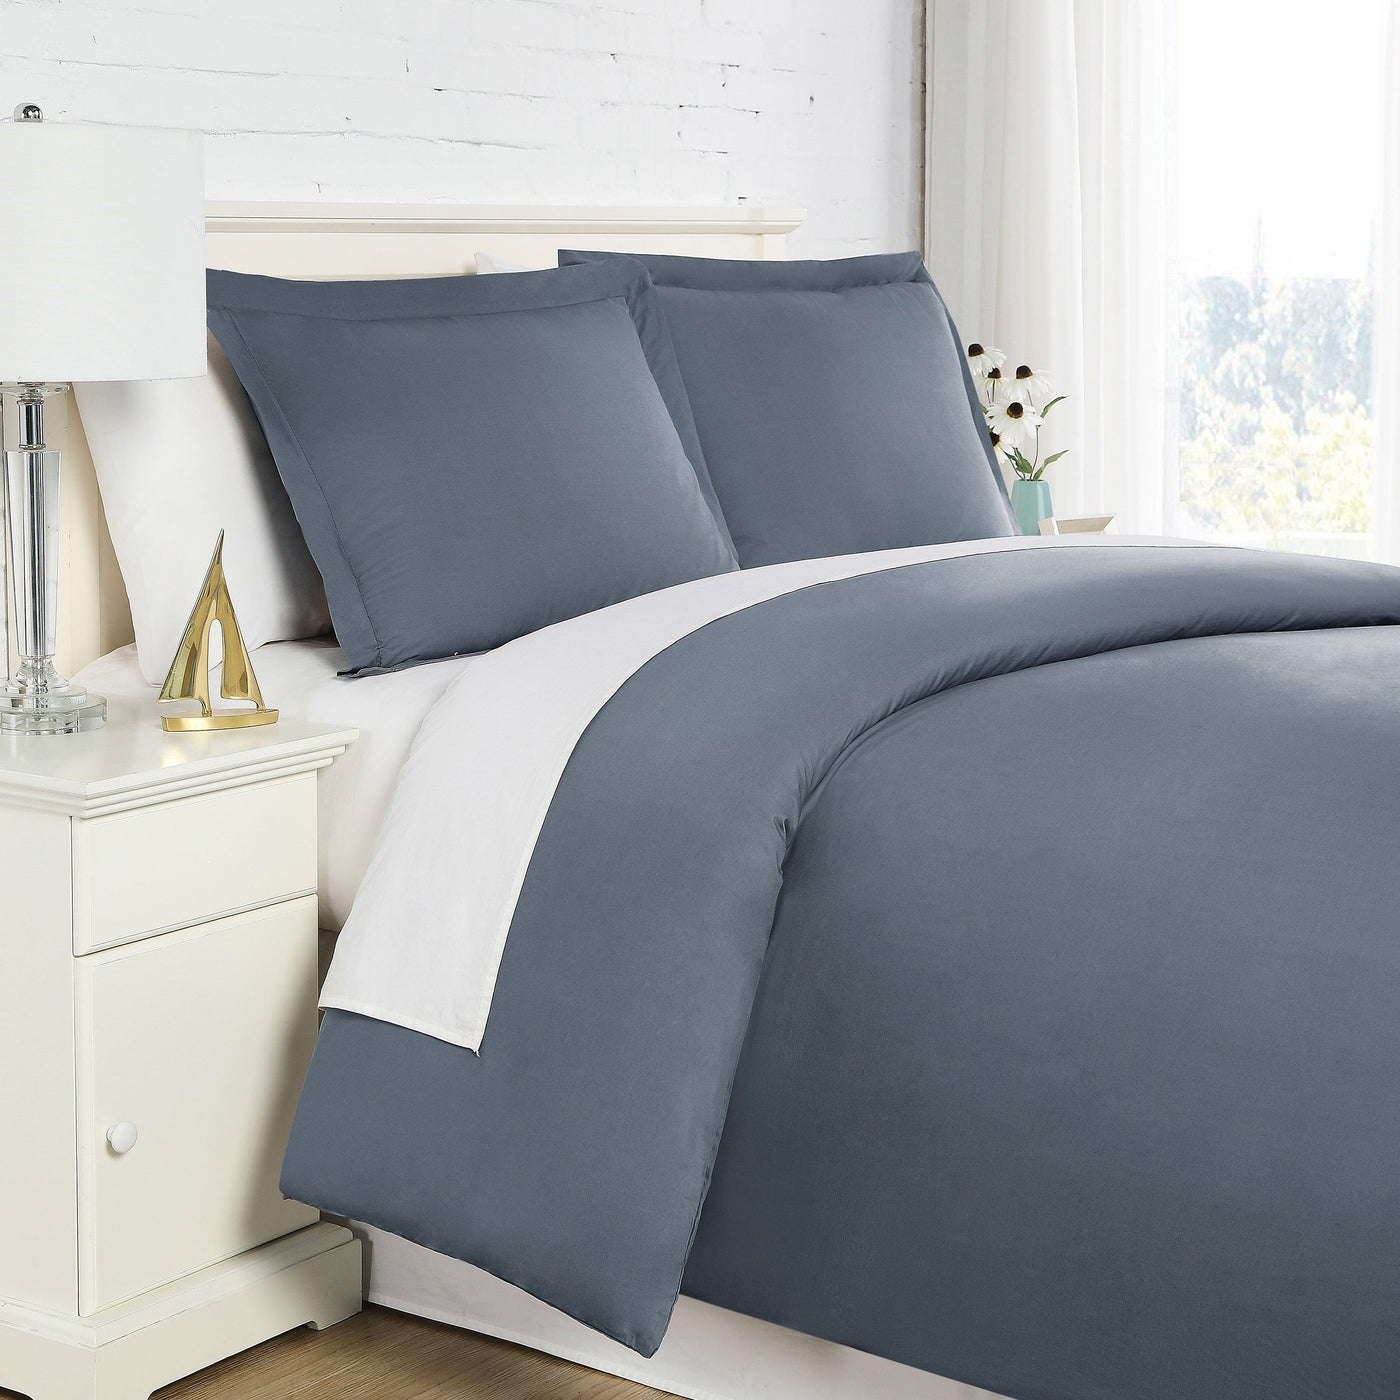 Details of 300 Thread Count Sateen Solid Cotton Duvet Cover Set in Steel Blue#color_solid-steel-blue